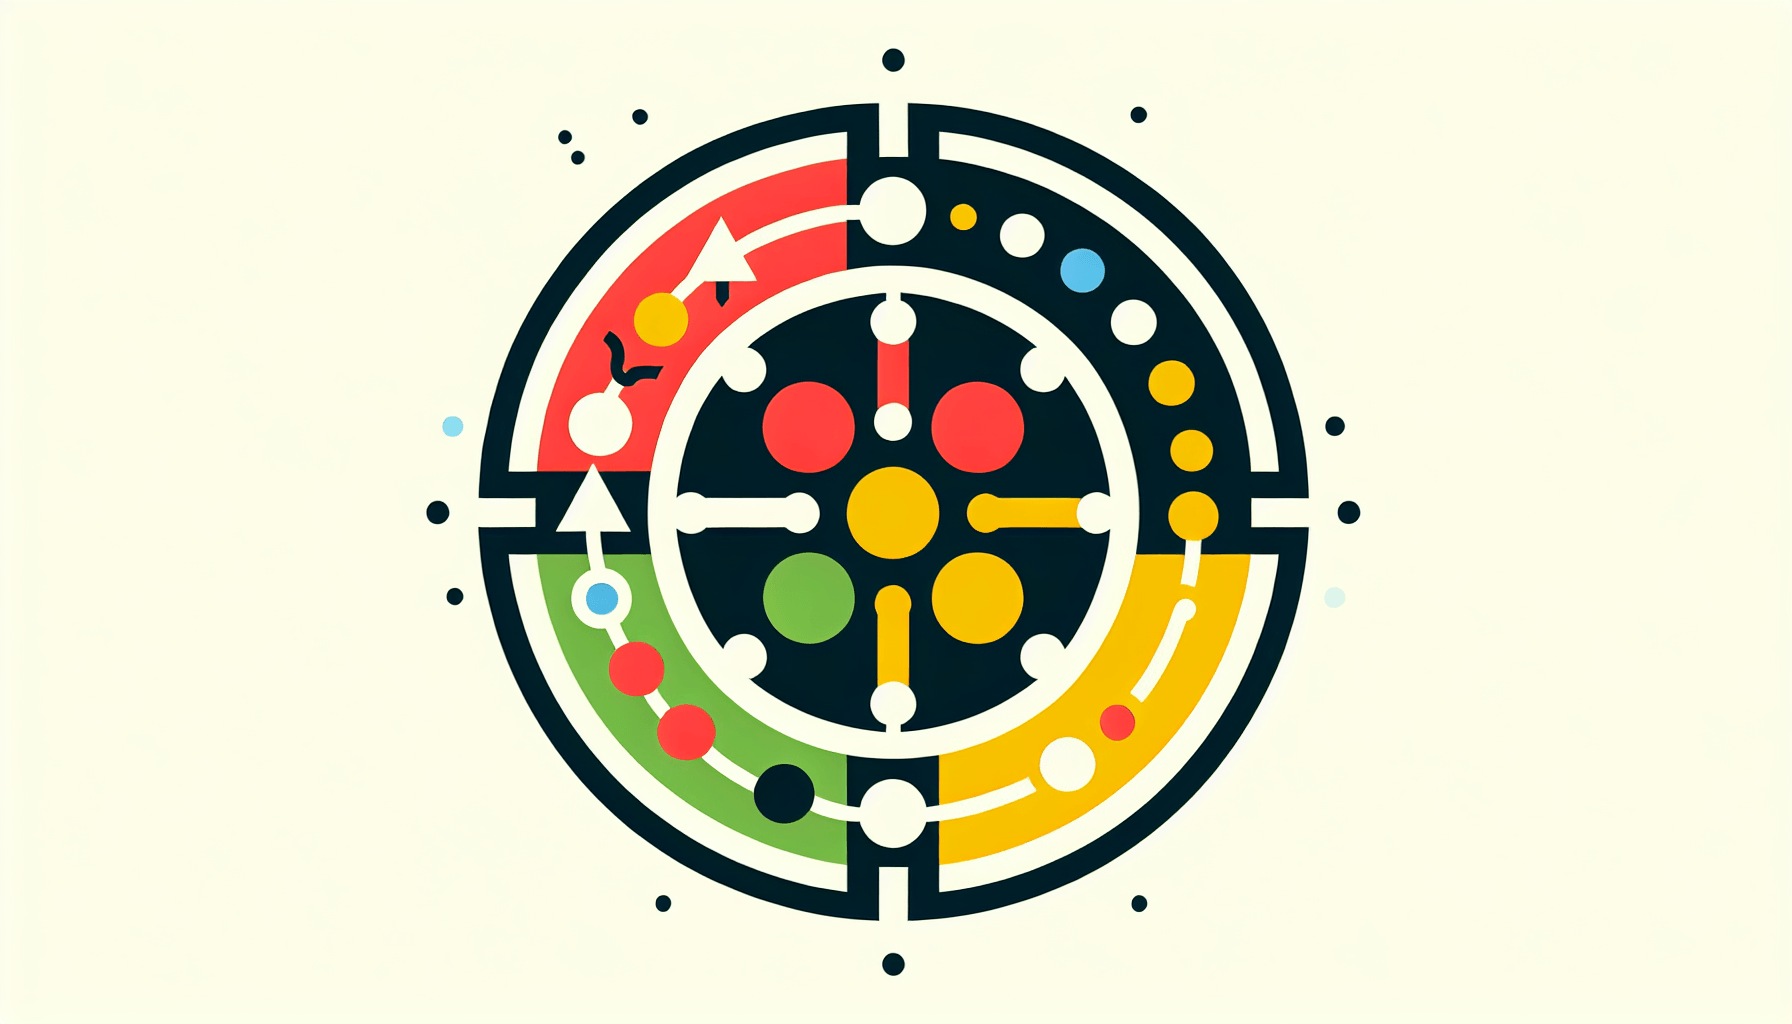 What is the circular model? in flat illustration style and white background, red #f47574, green #88c7a8, yellow #fcc44b, and blue #645bc8 colors.